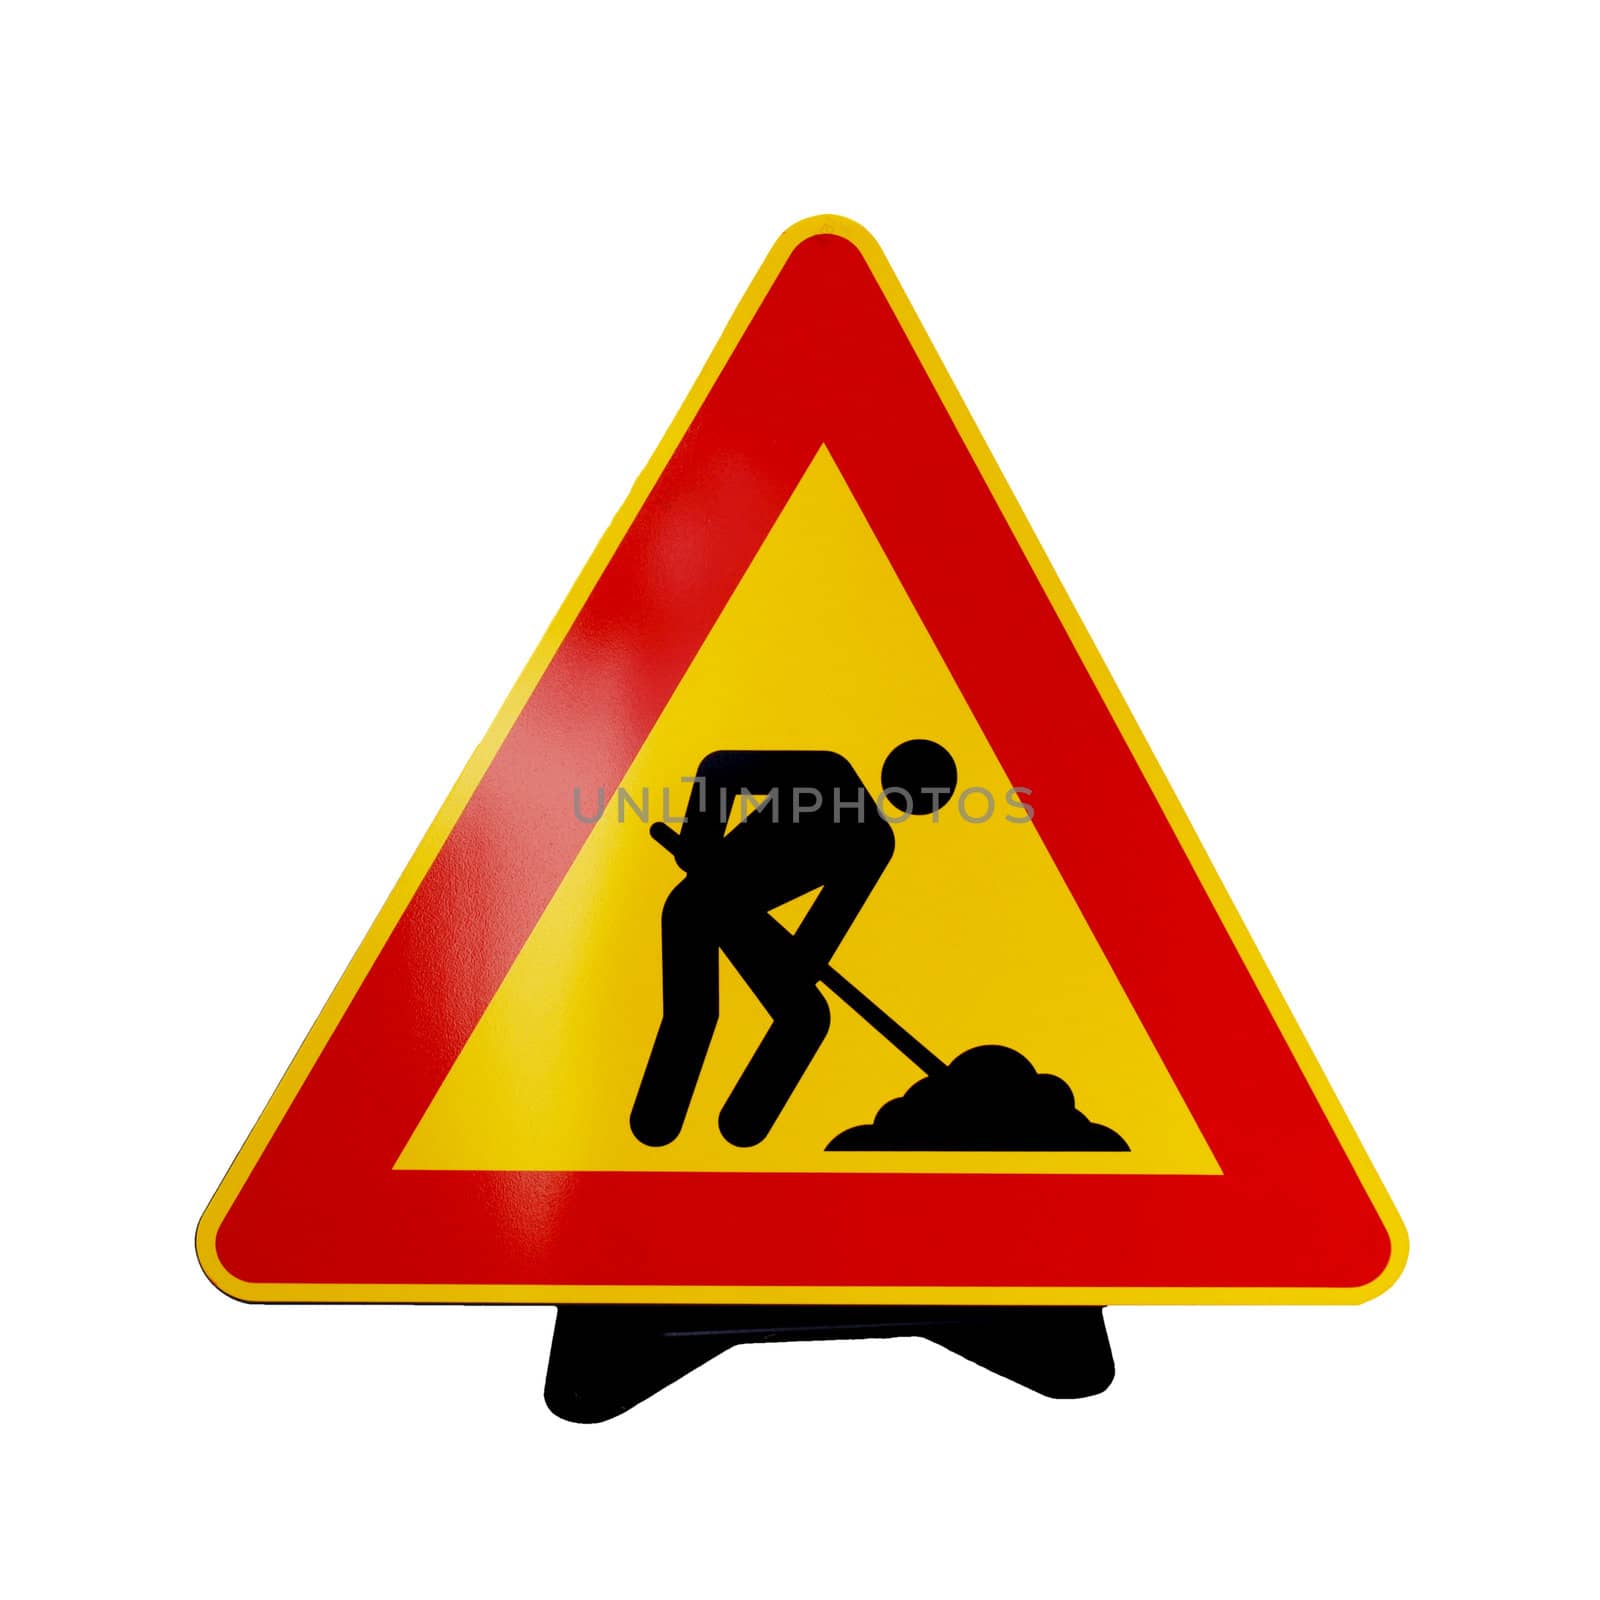 Road work sign isolated over a white background